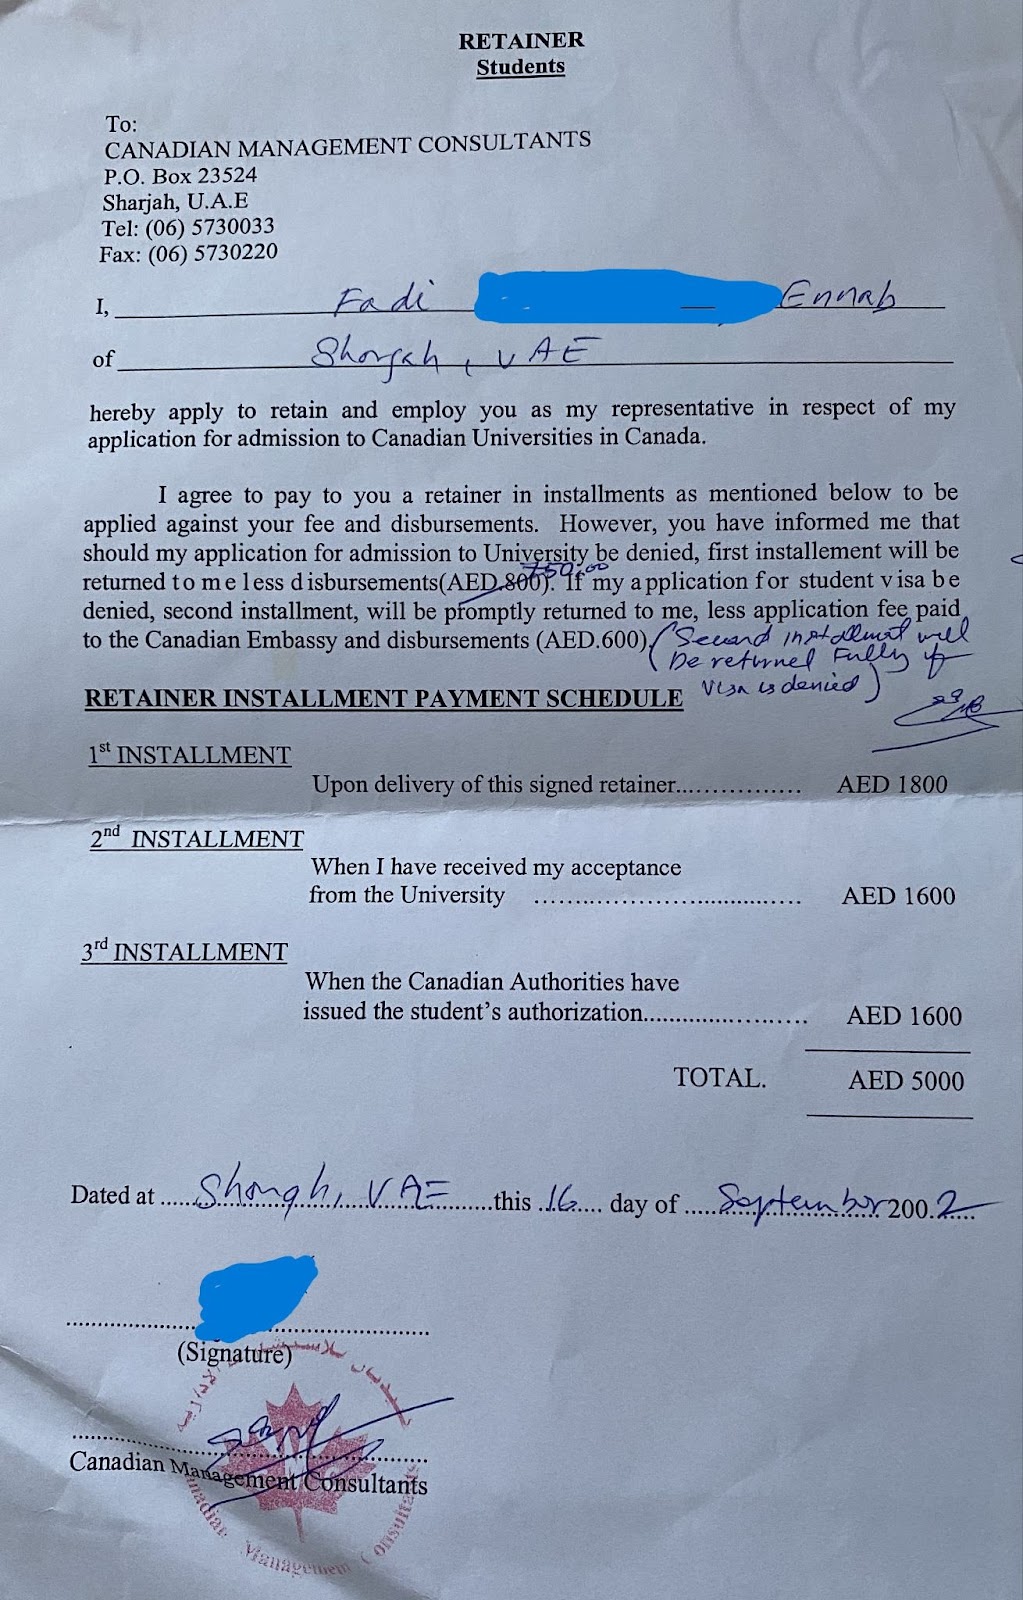 Photo of retainer signed by Fadi in 2002 that details the payment schedule for getting accepted to university and awarded a study permit.